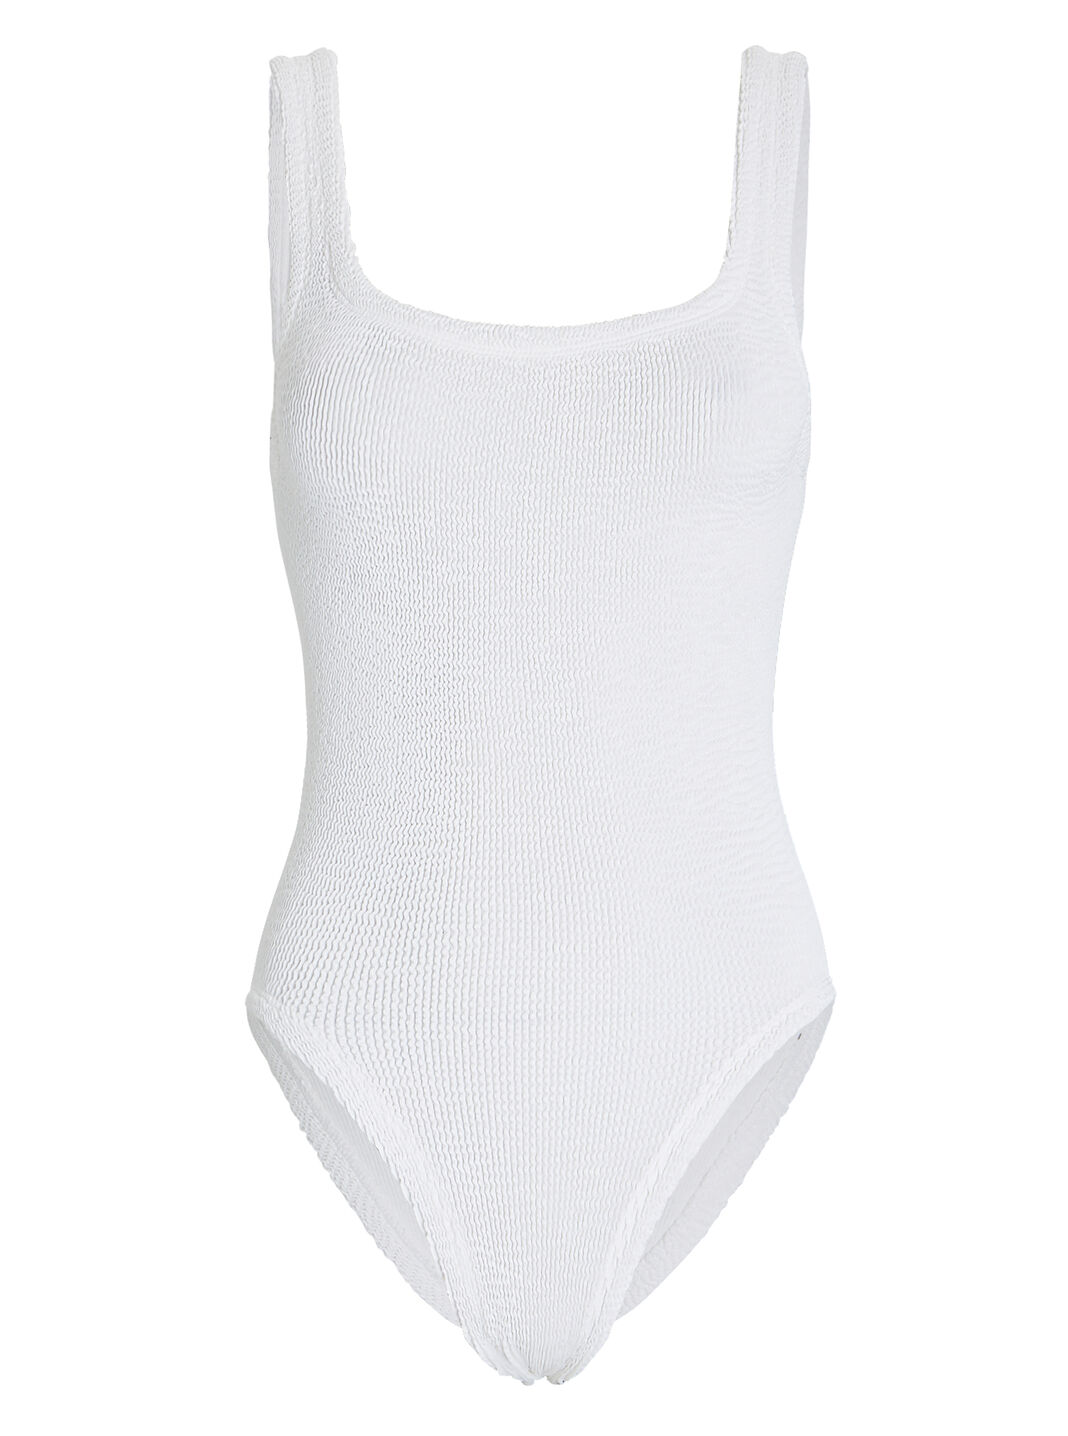 Square Neck One-Piece Swimsuit